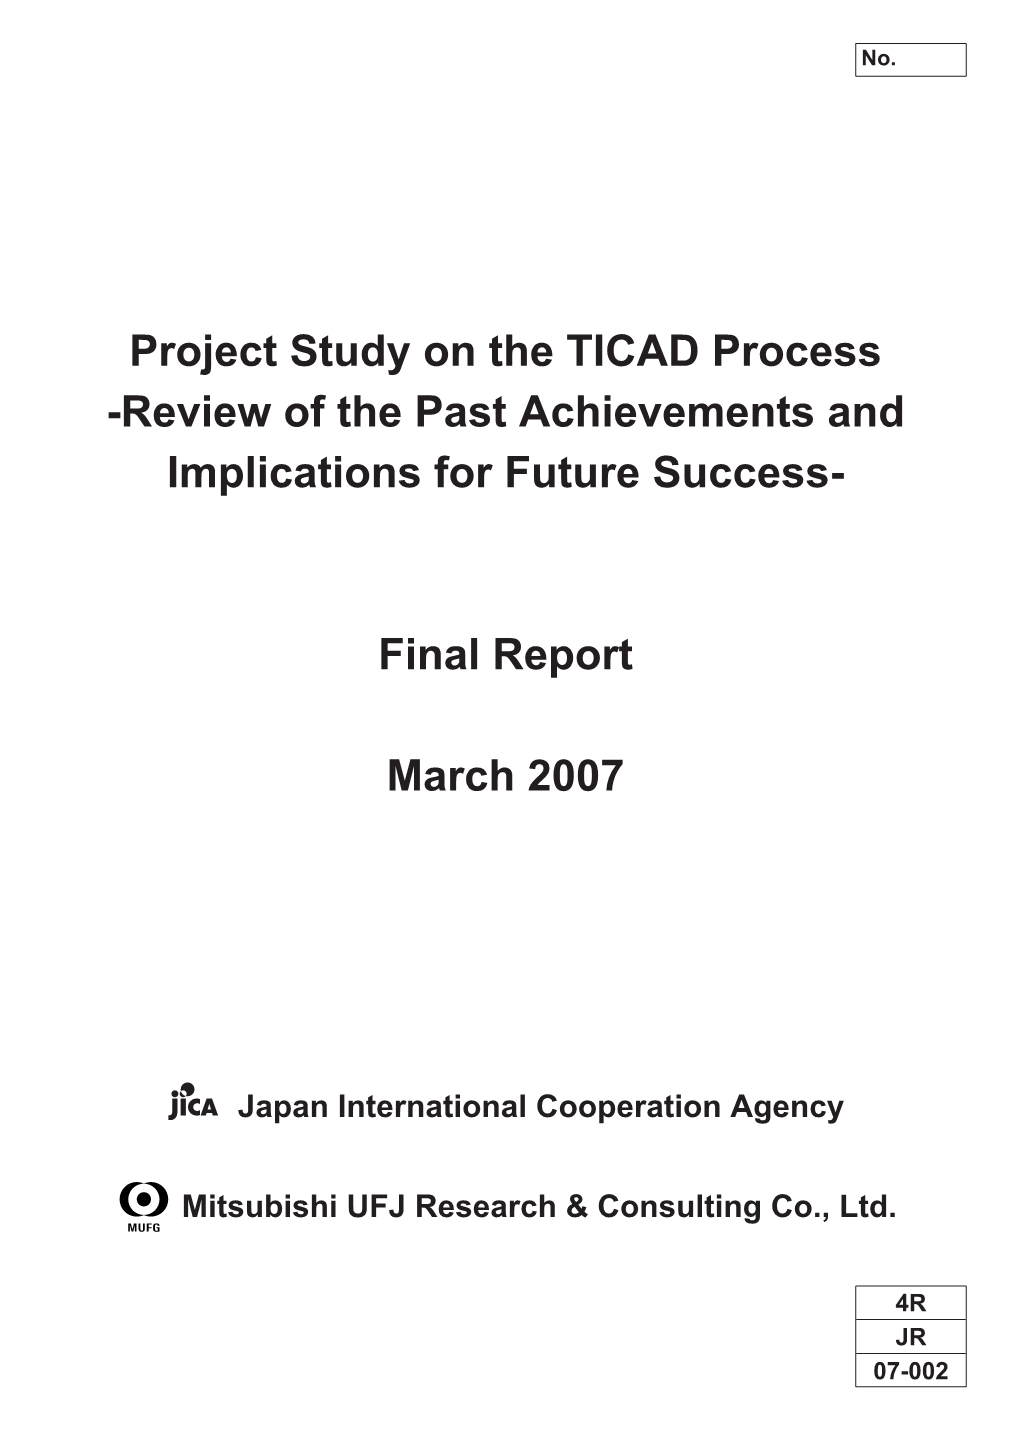 Project Study on the TICAD Process -Review of the Past Achievements and Implications for Future Success